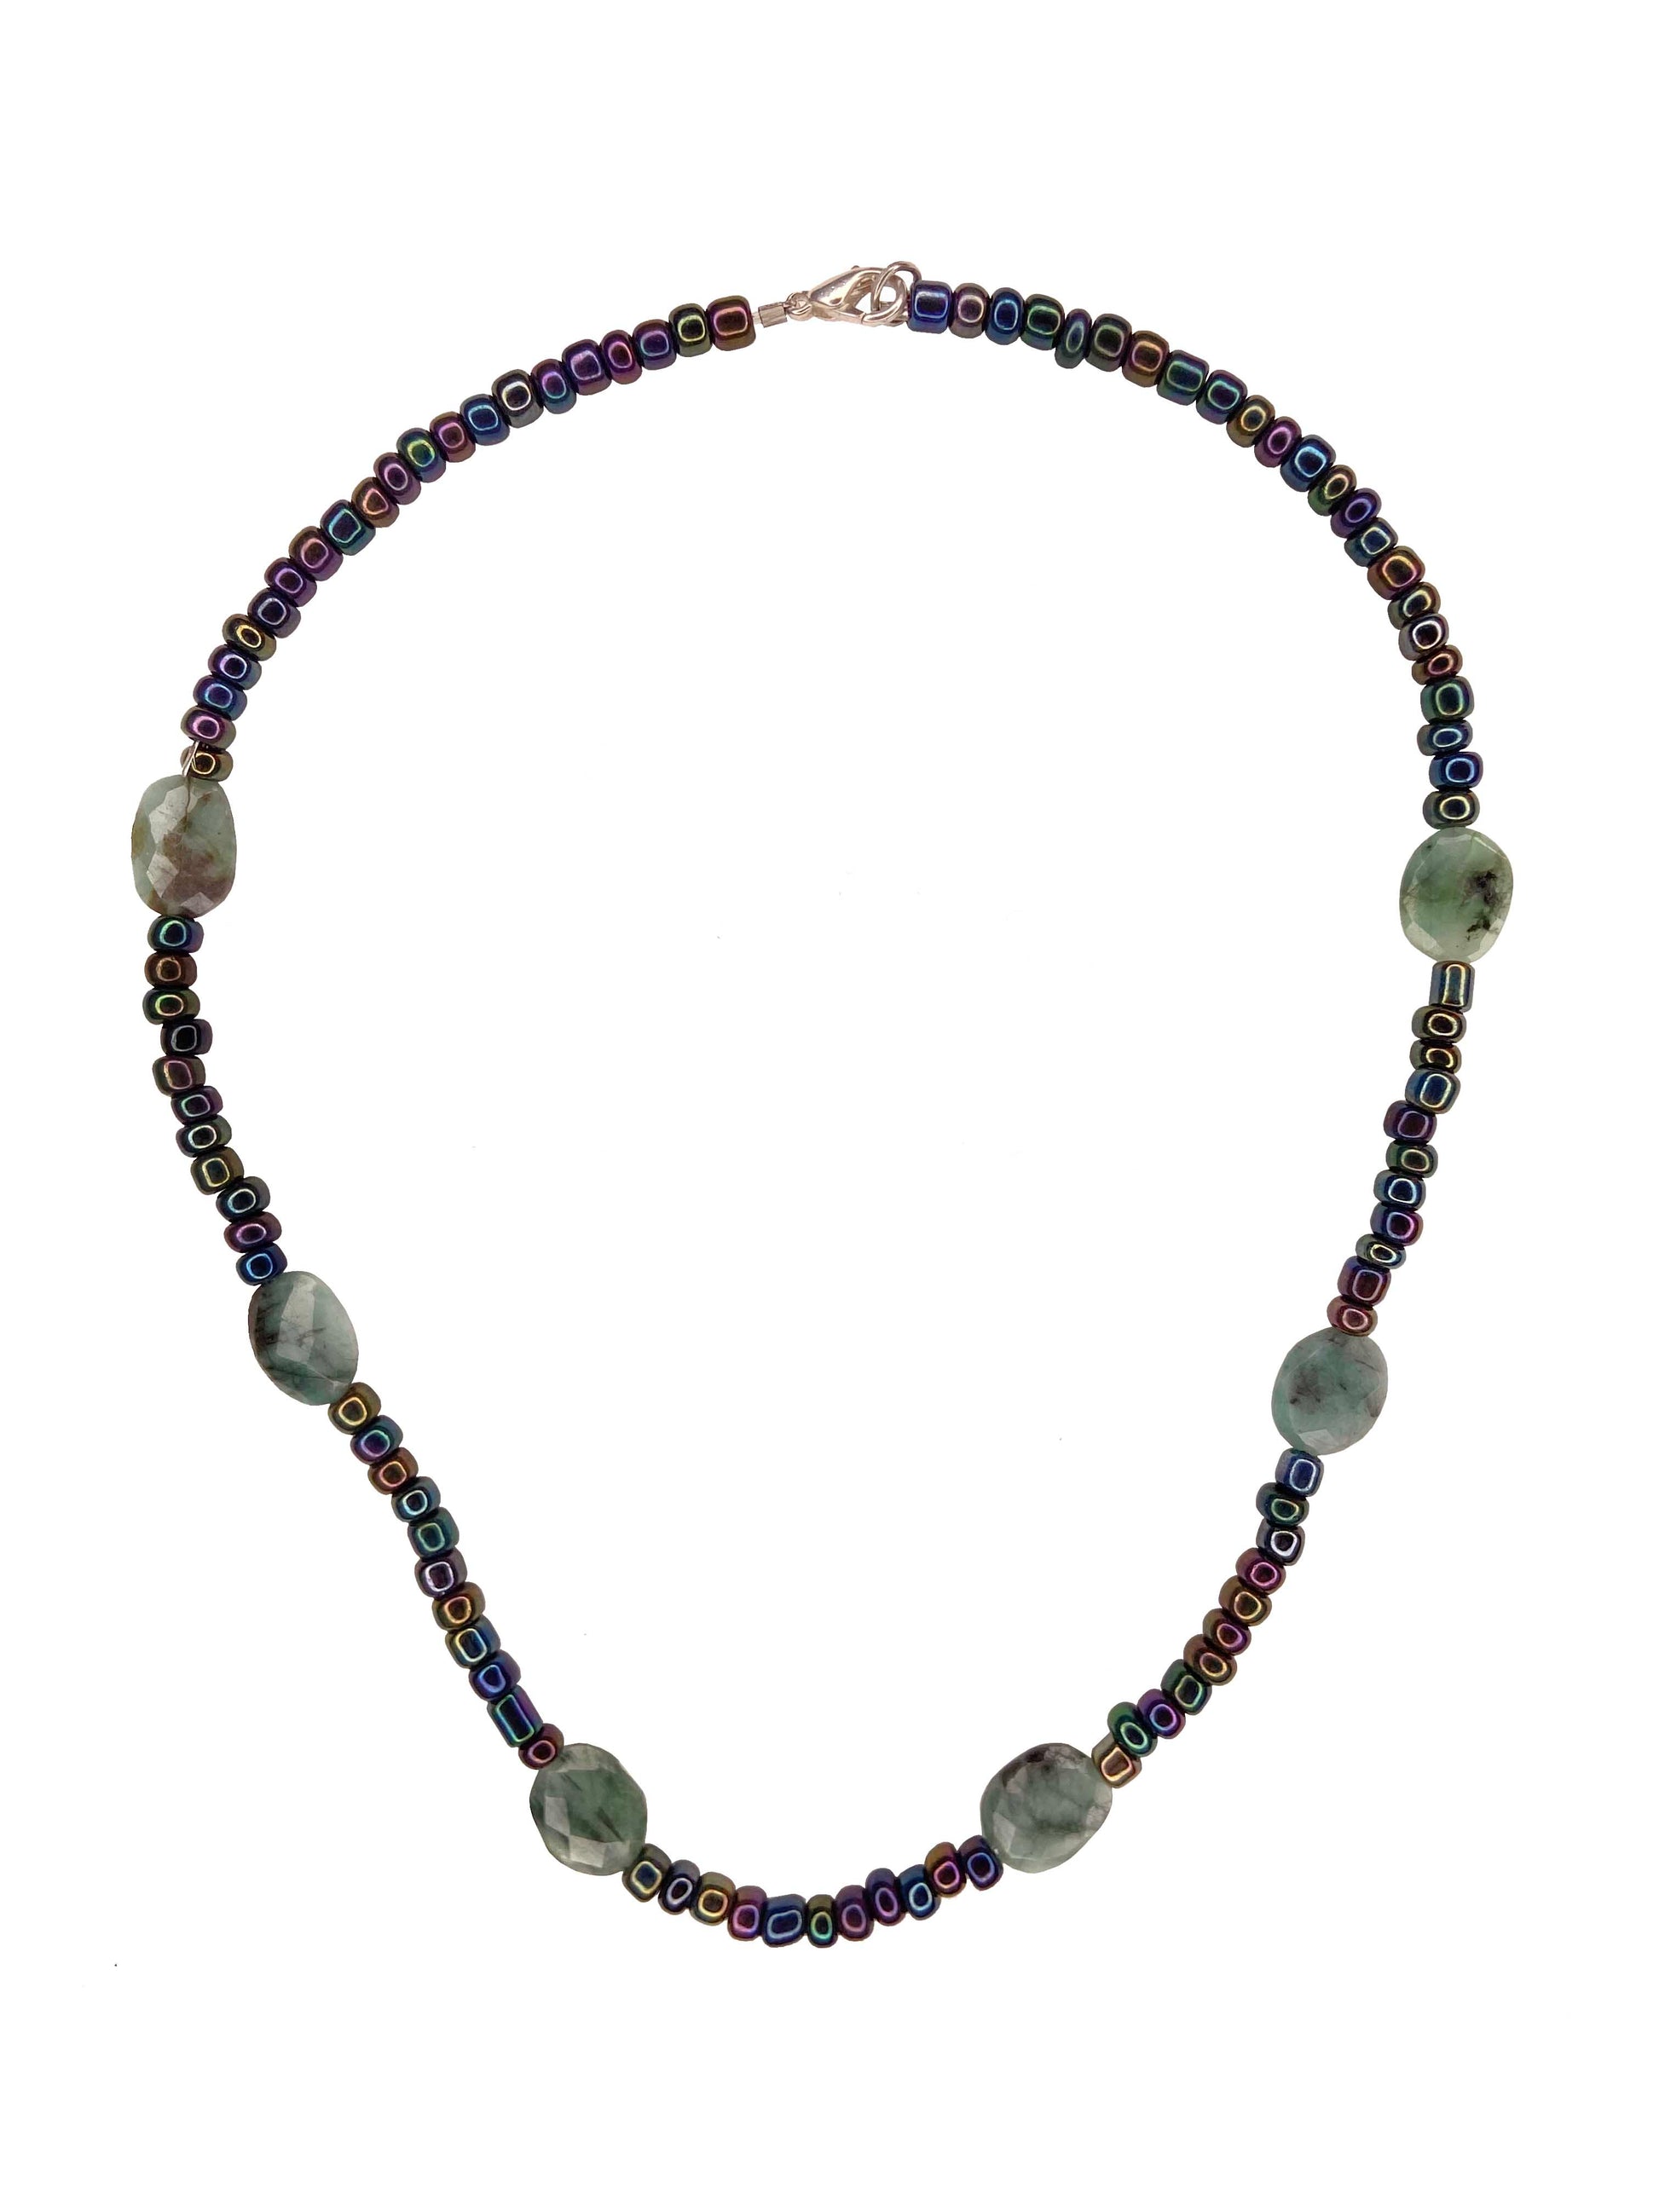 Holographic chrome beaded necklace with emerald stones